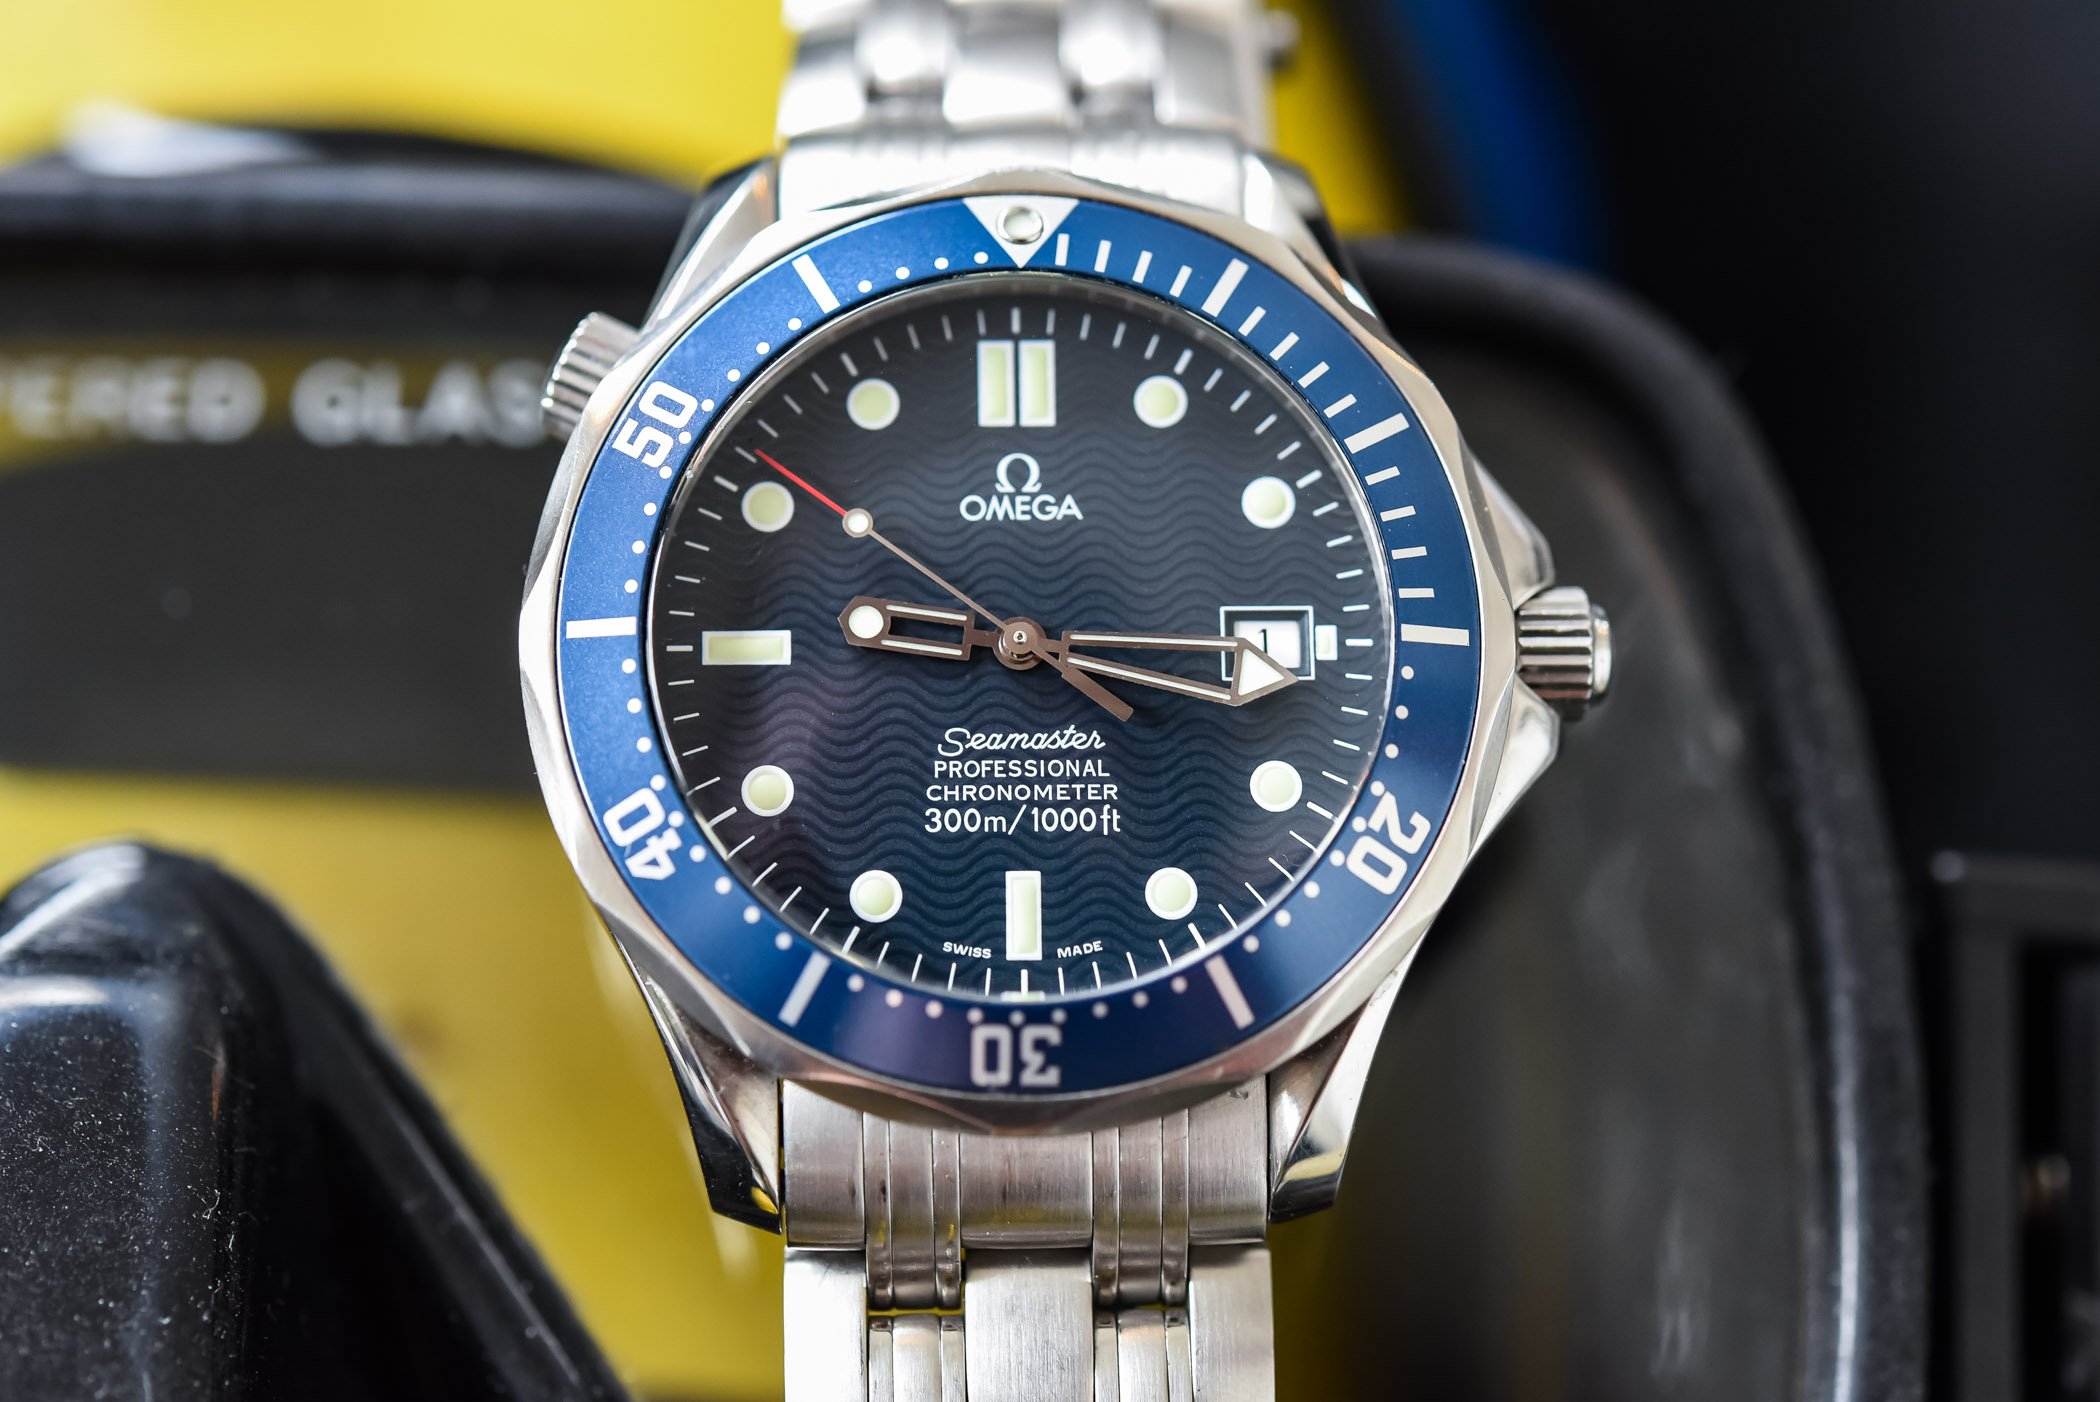 Collector's Corner - The Omega Seamaster Professional Diver SMP 300